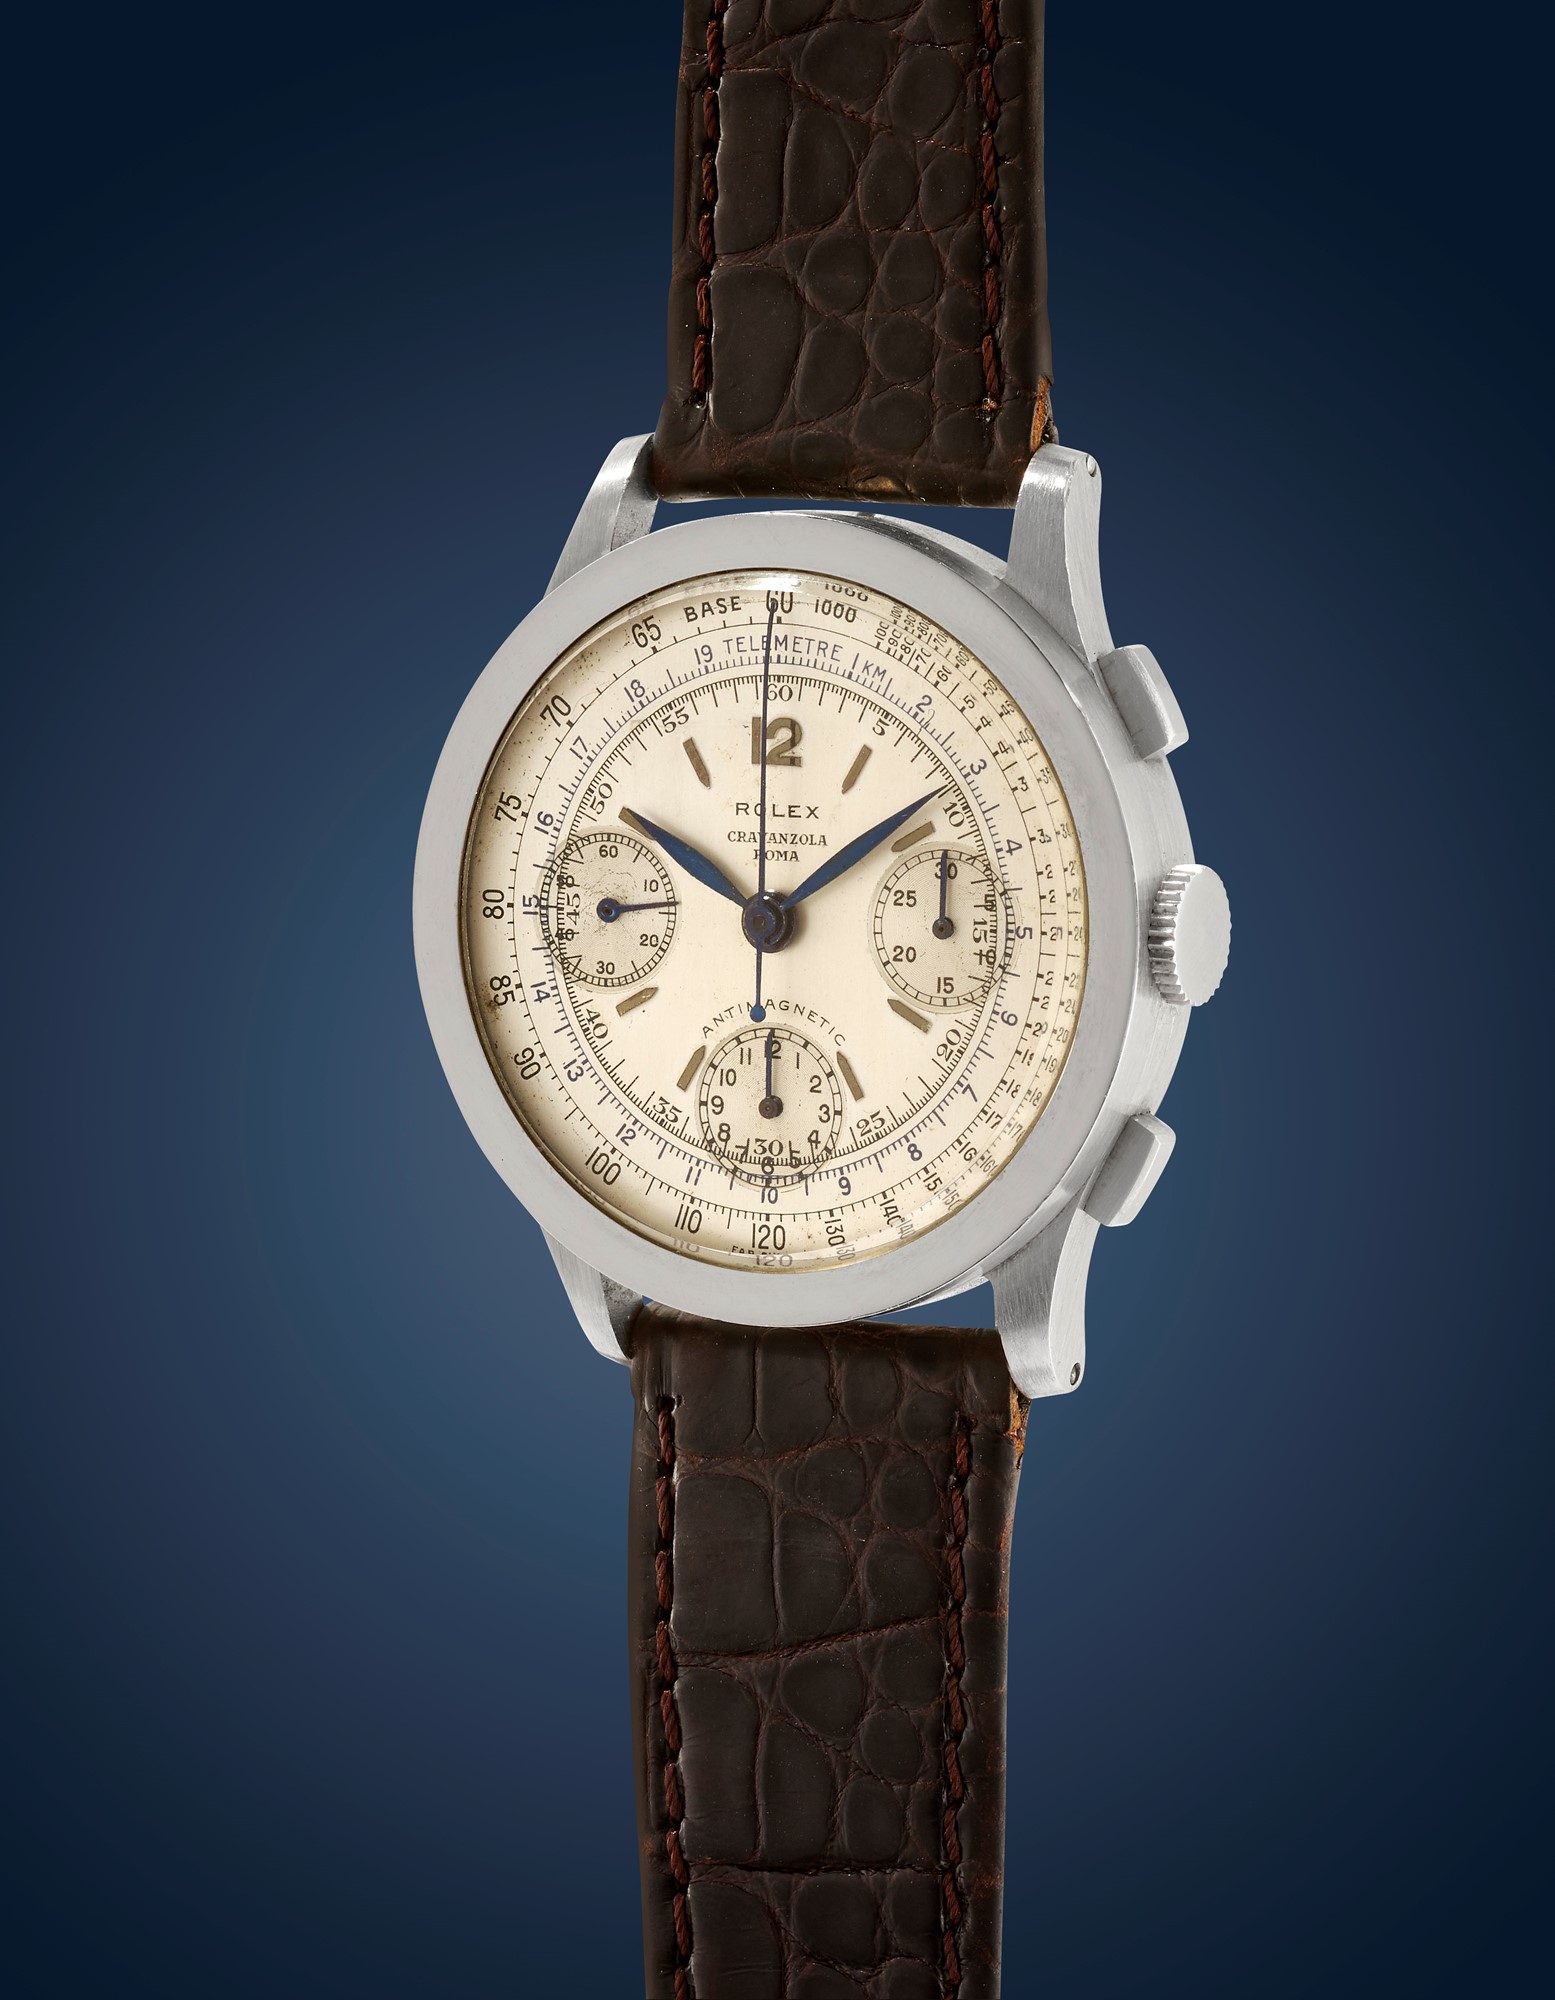 Rolex 3330 chronograph retailed by Cravanzola, '40s - Image 2 of 2